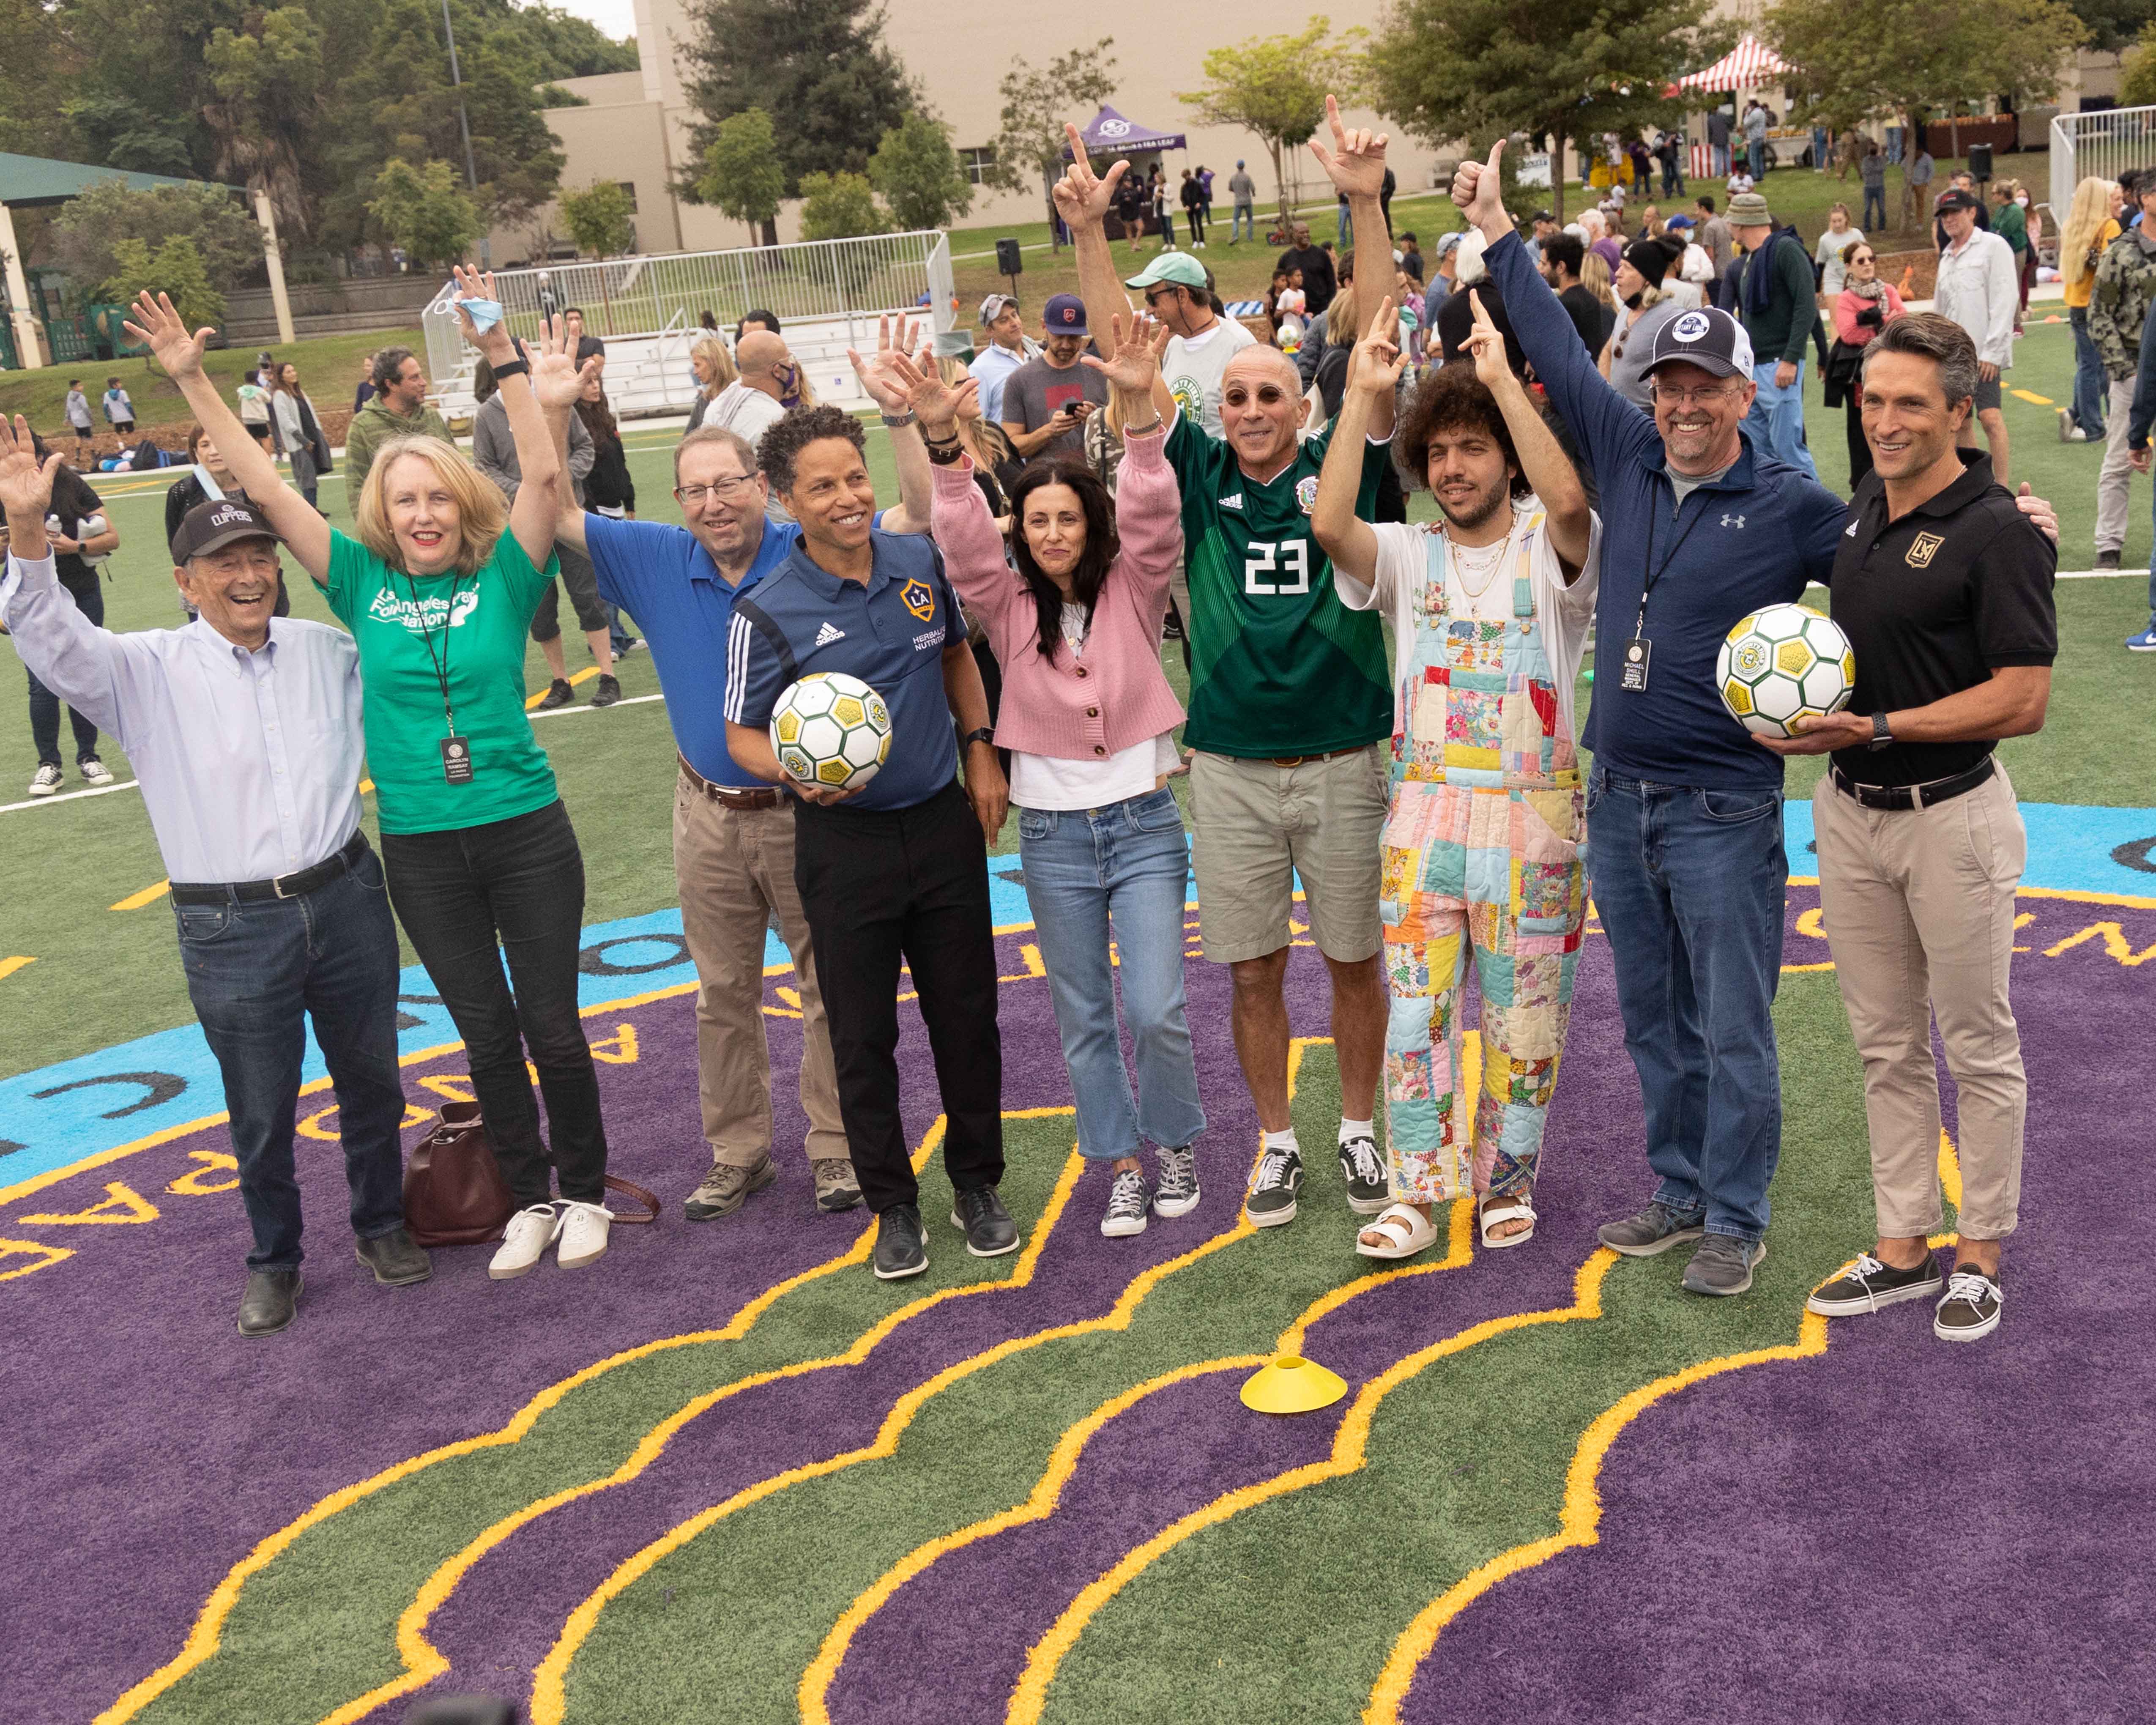 Members of the Mark family (center) are joined by representatives from the City of Los Angeles, LA Galaxy legend Cobi Jones (center left) and LAFC President John Thorrington (right) at center field of “Tommy’s Field” at Westwood Park Recreation Center in Los Angeles 